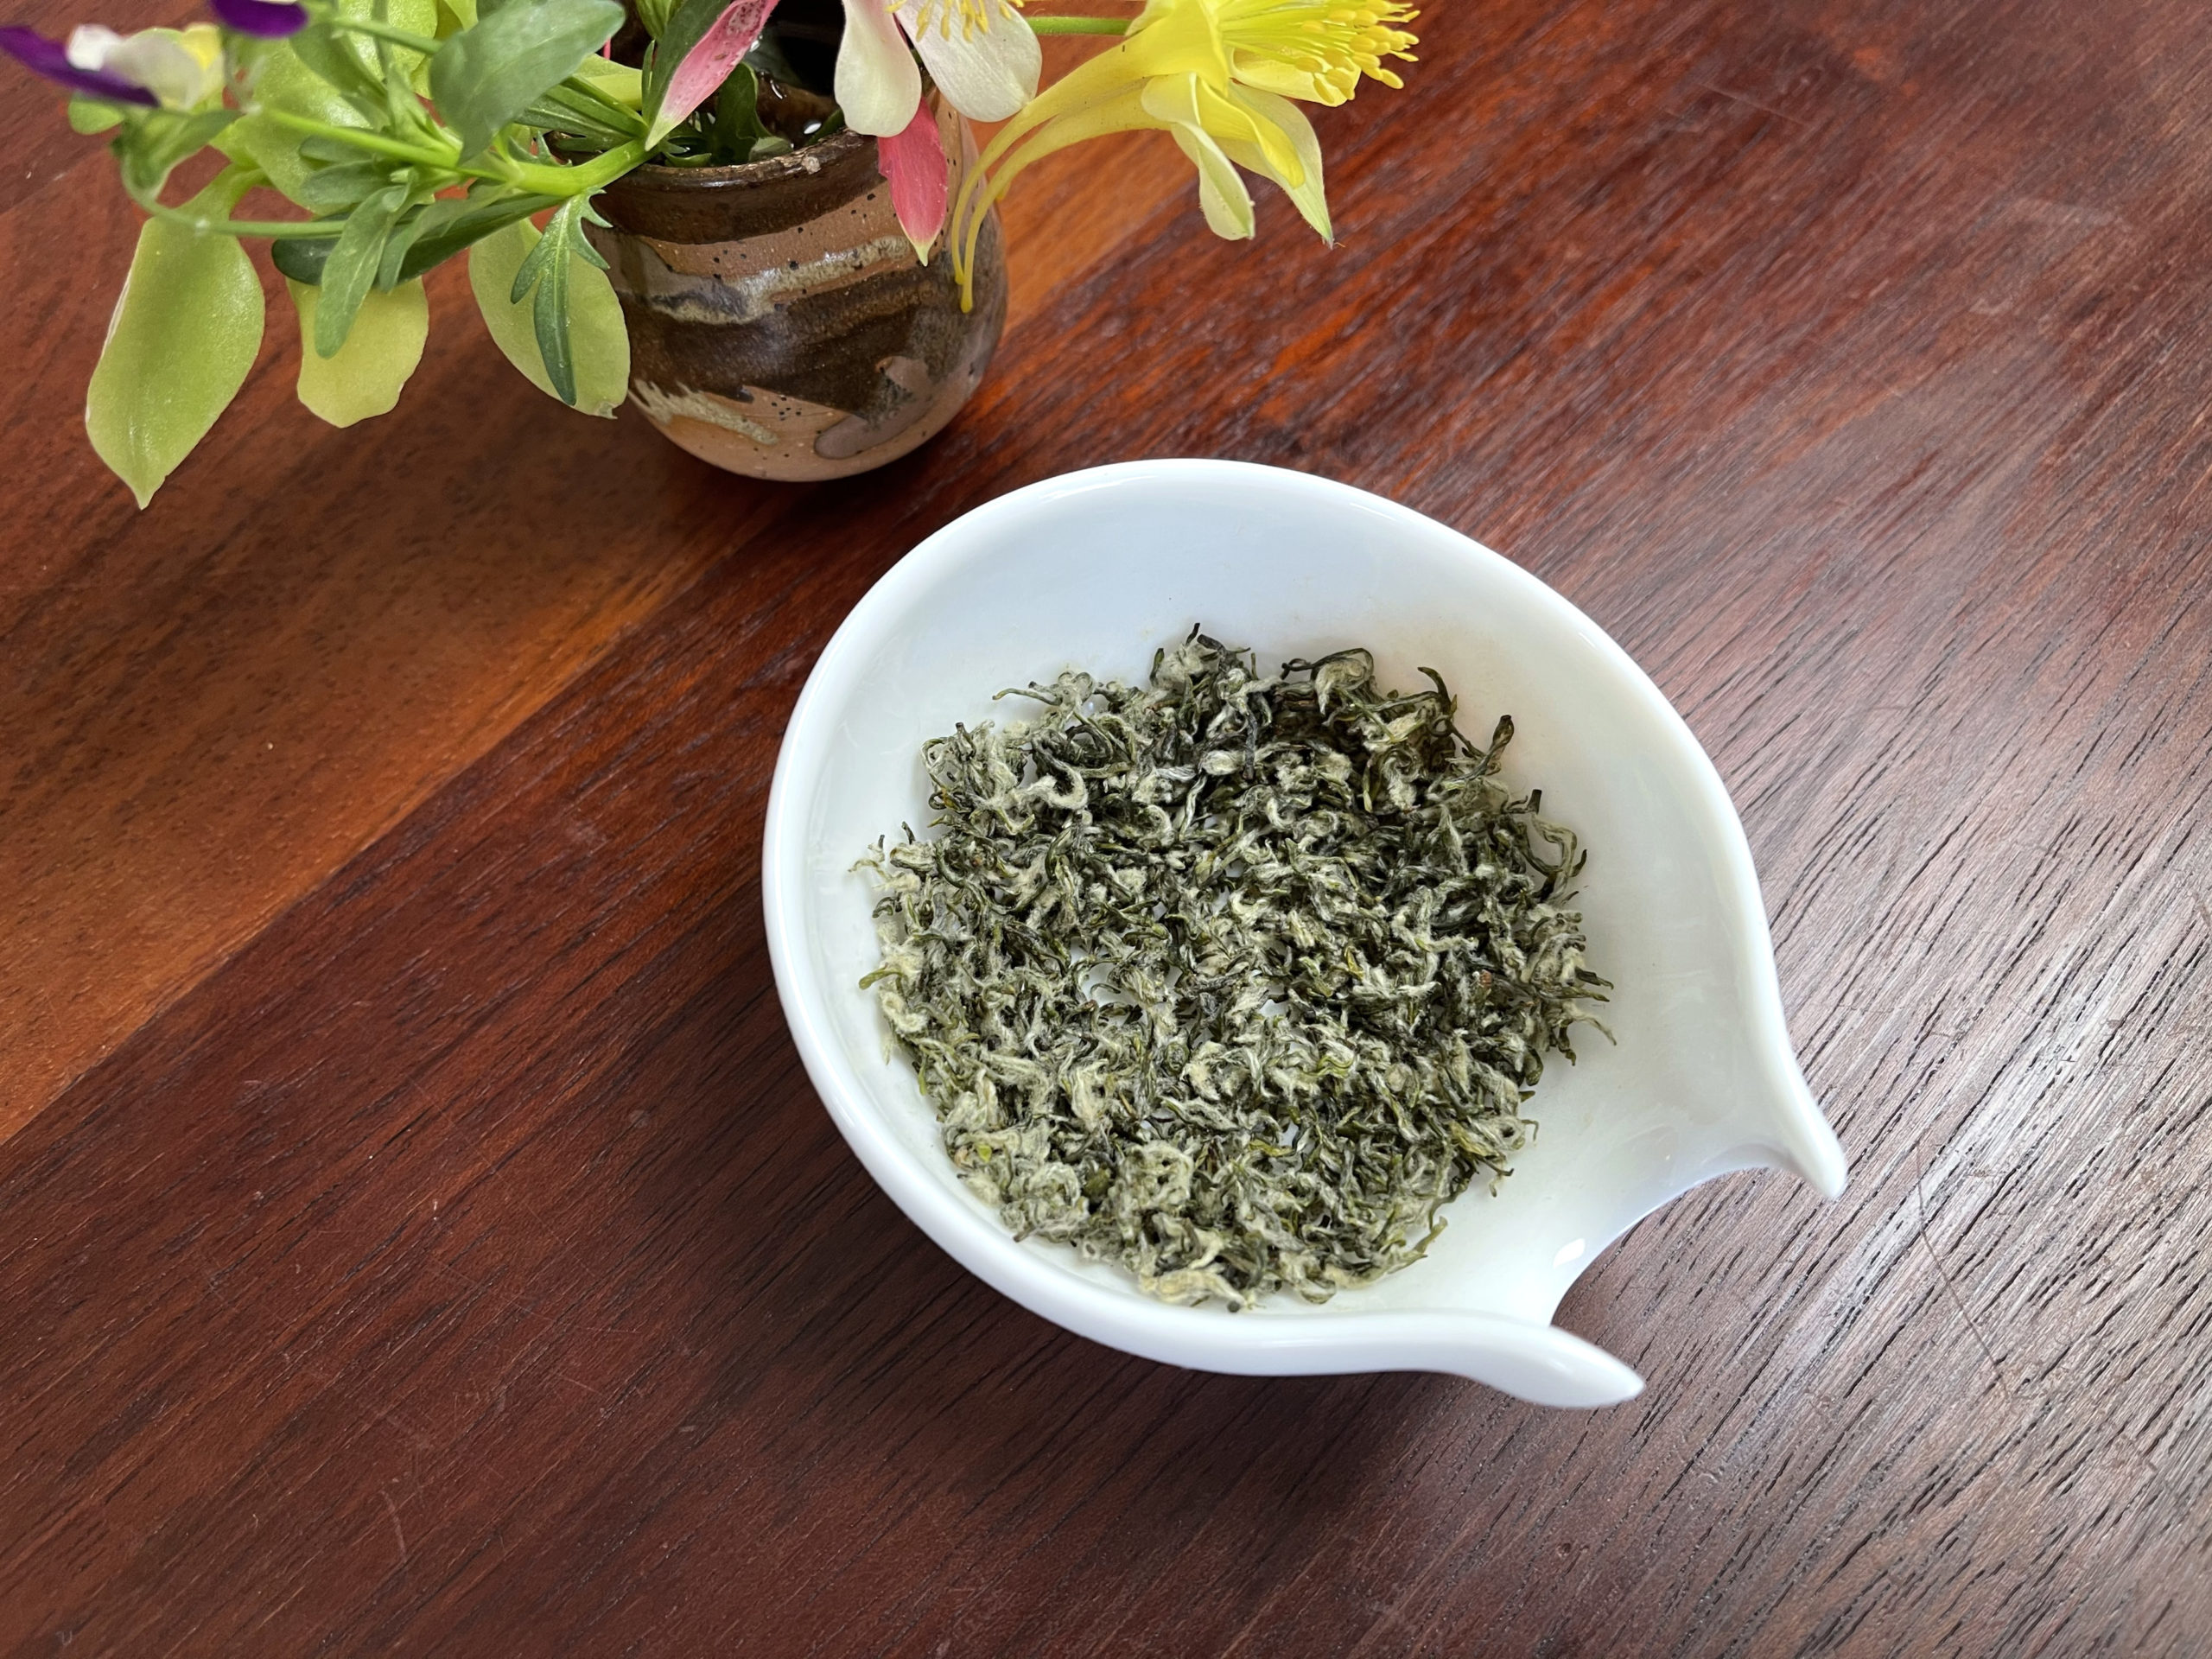 Very small and fluffy green tea leaves in a white dish on a woodent able next to a small flower bouquet.